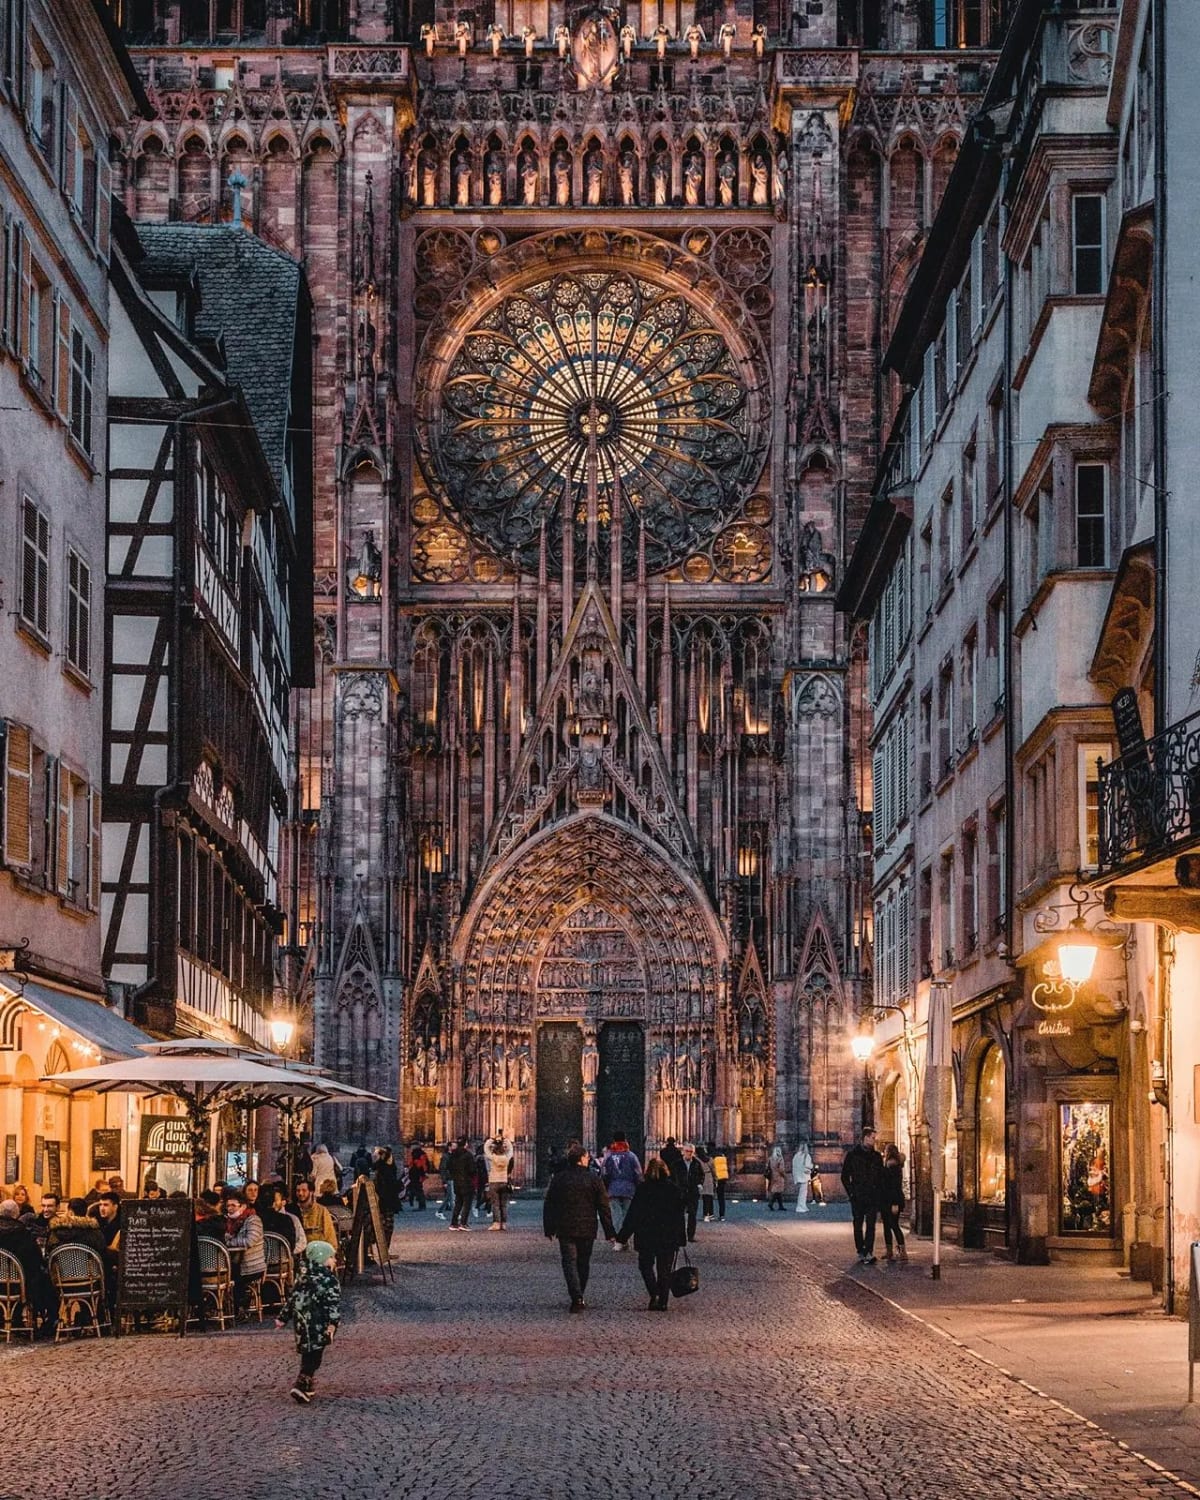 The massive Gothic facade of Strasbourg Cathedral, built between 1015 and 1439, seen from the Rue Mercière in the Grande Île island that lies at the historic center of Strasbourg, Grand Est, France.